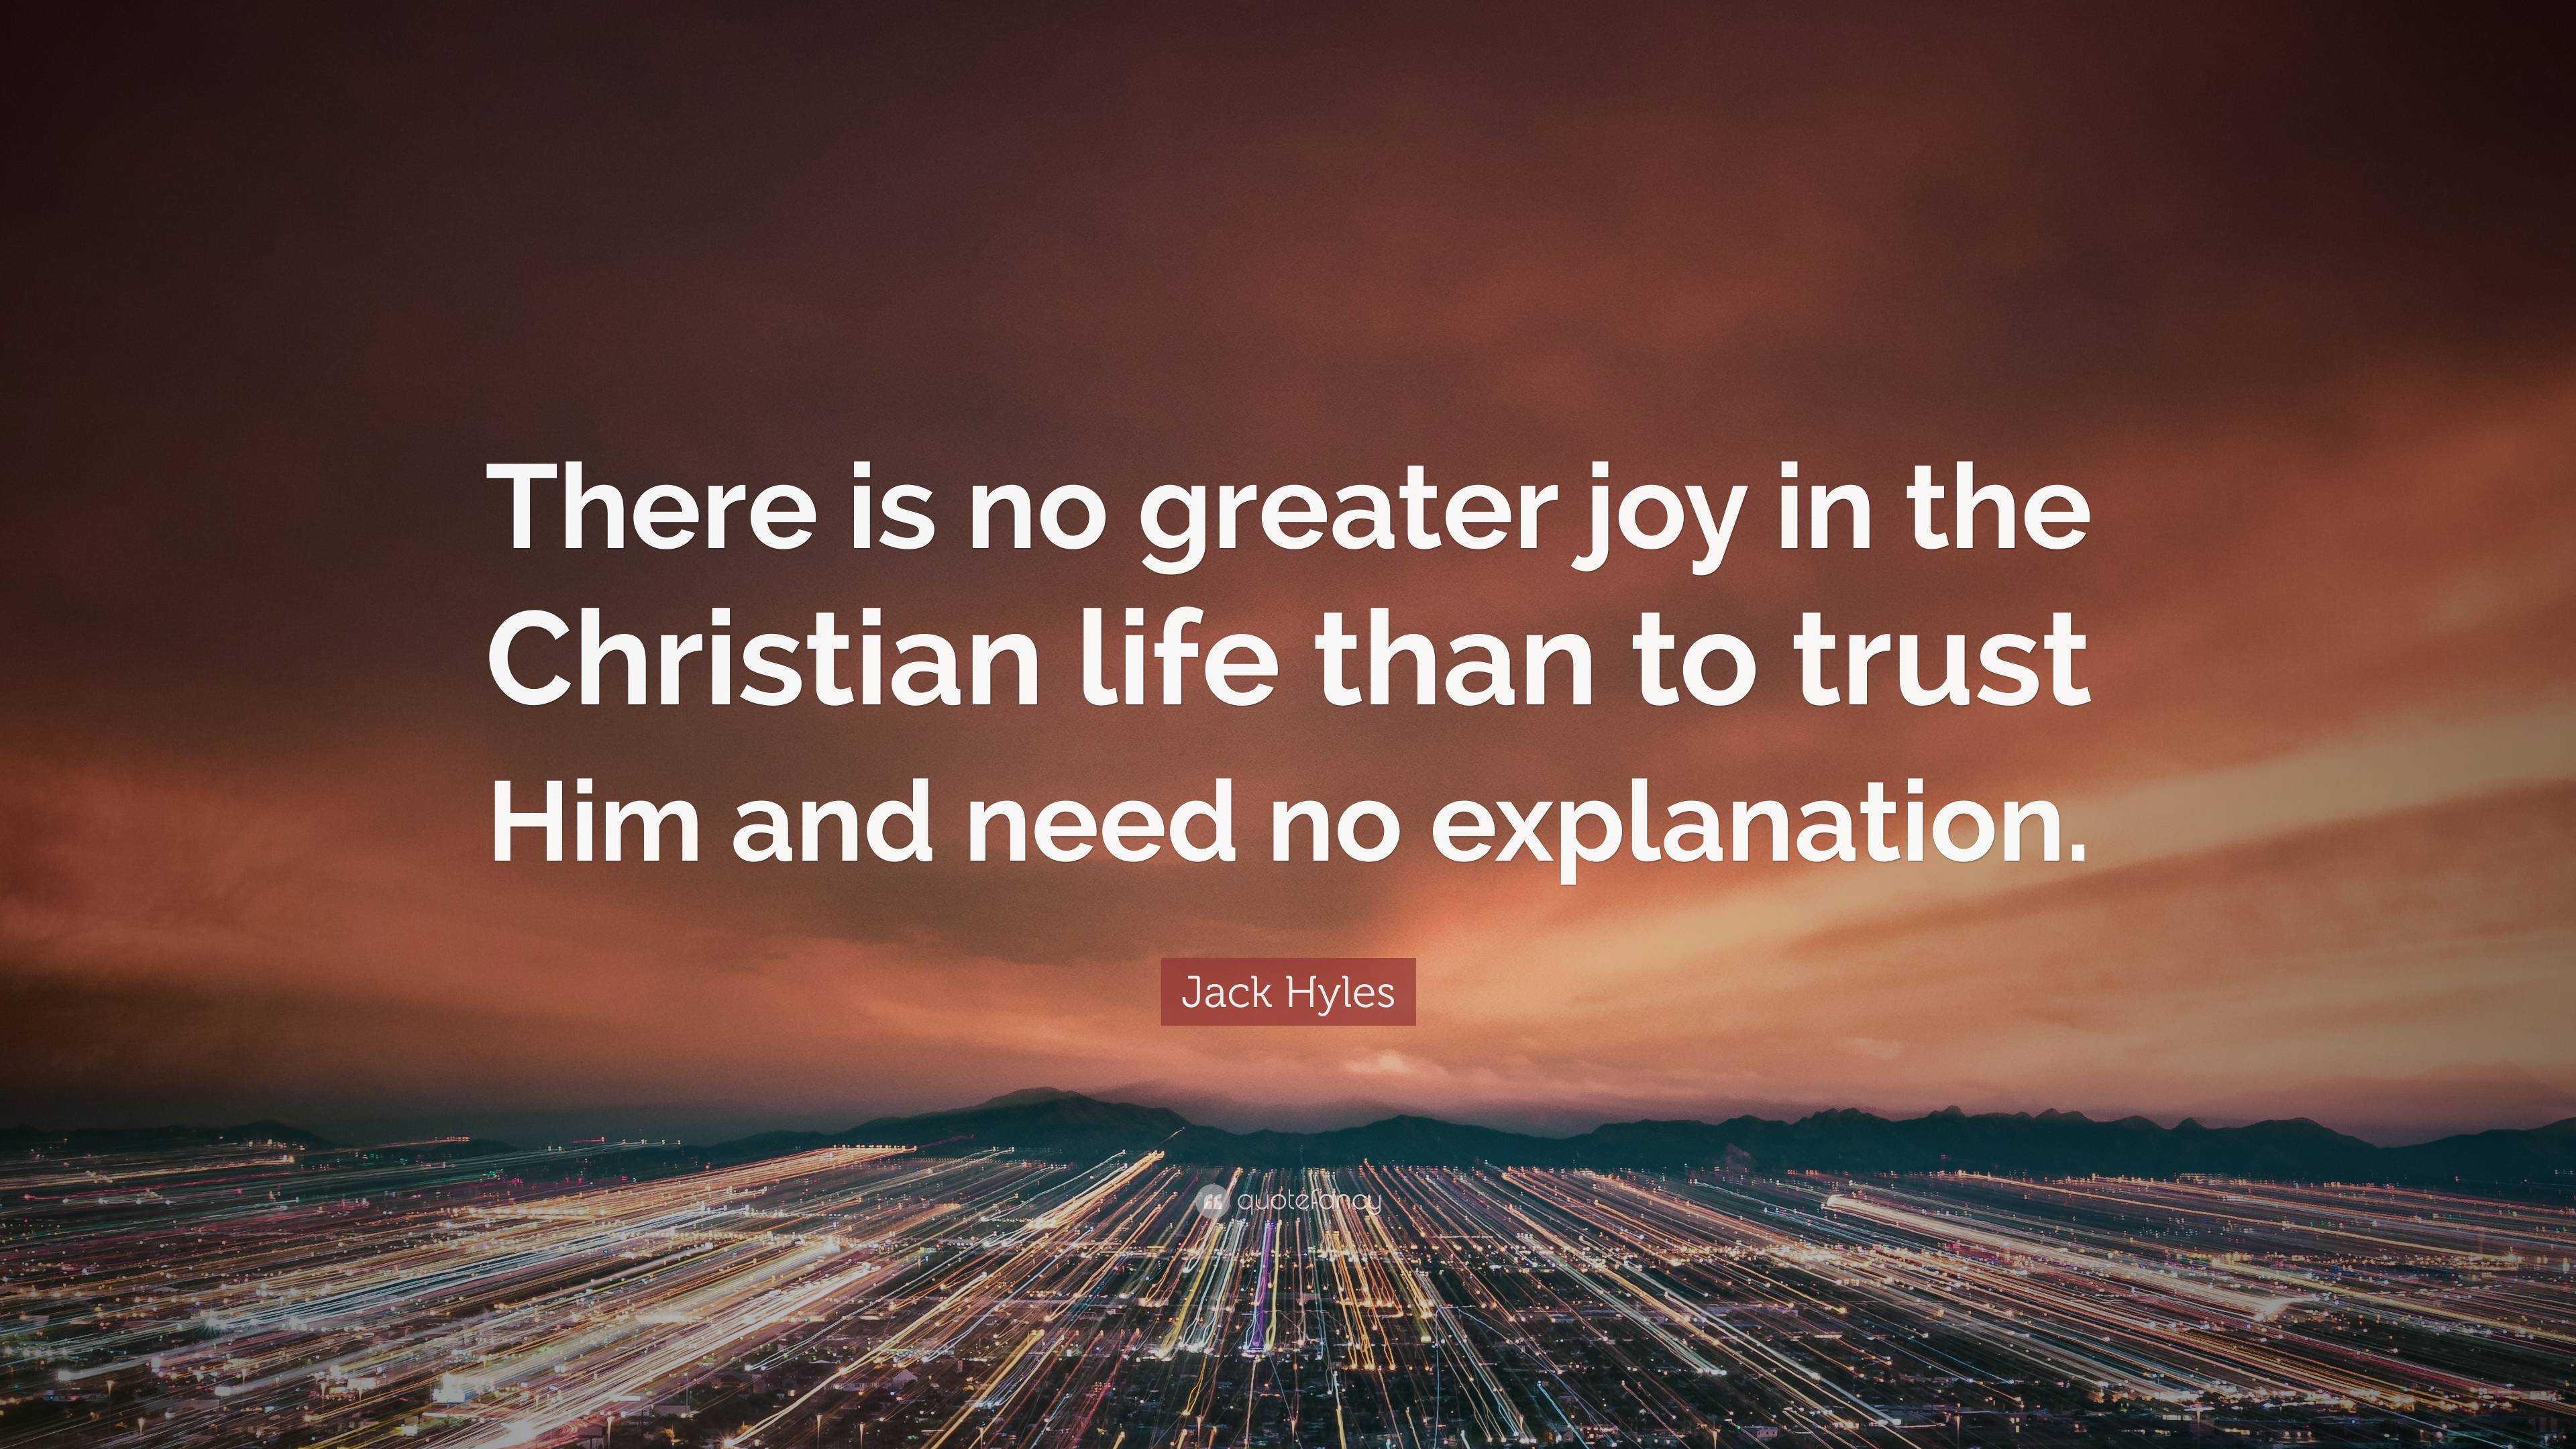 Jack Hyles Quote: “There is no greater joy in the Christian life than ...